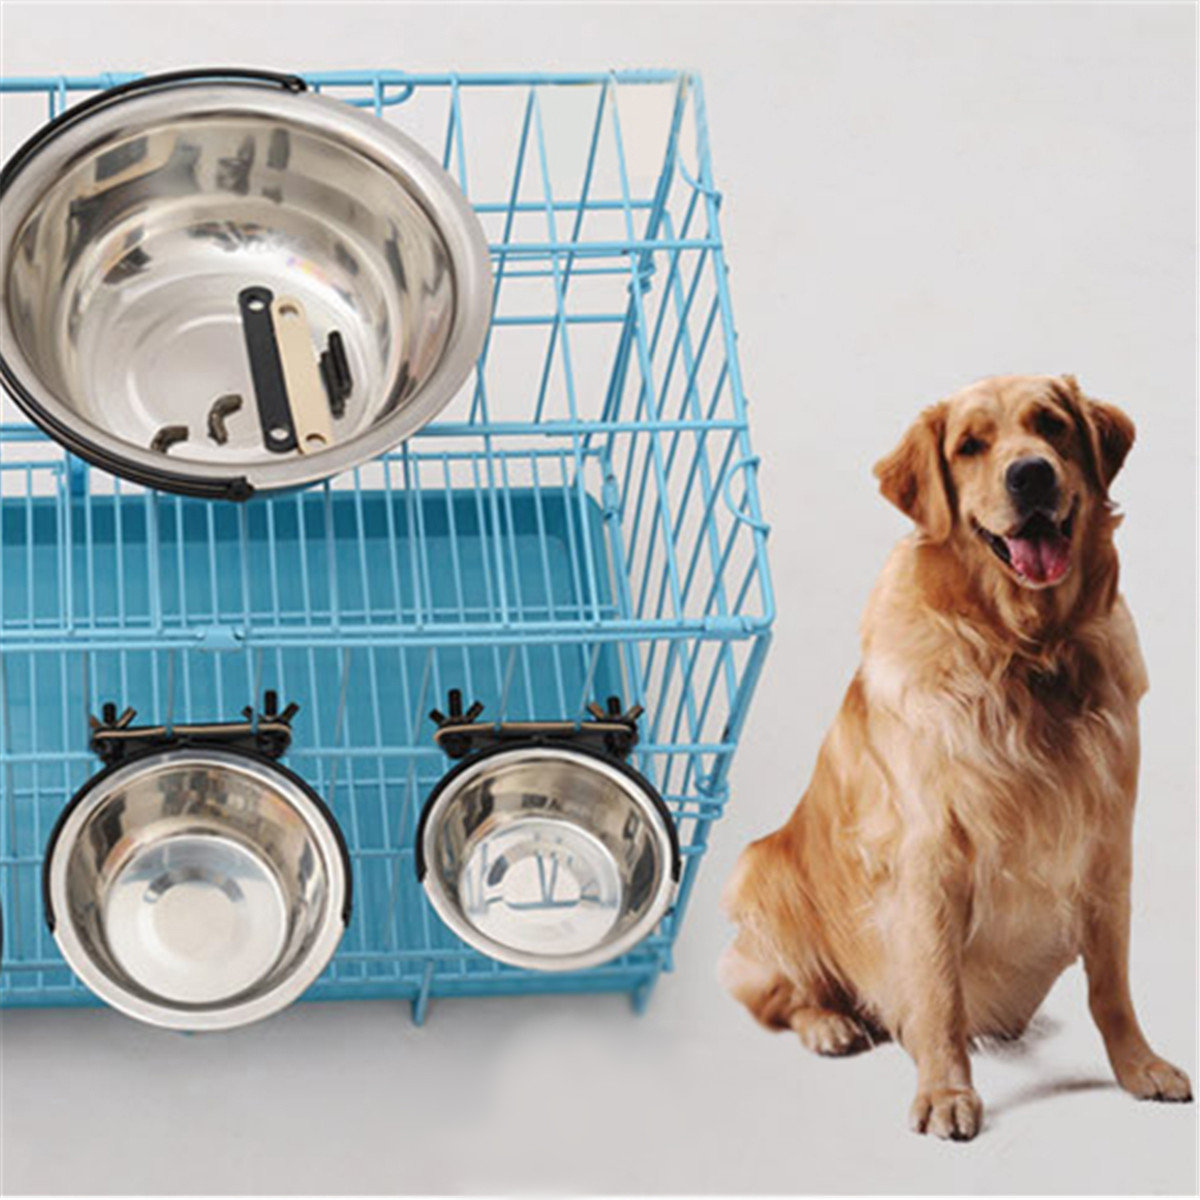 Pet Dog Puppy Stainless Steel Hanging Food Water Bowl Feeder For Crate Cage Coop